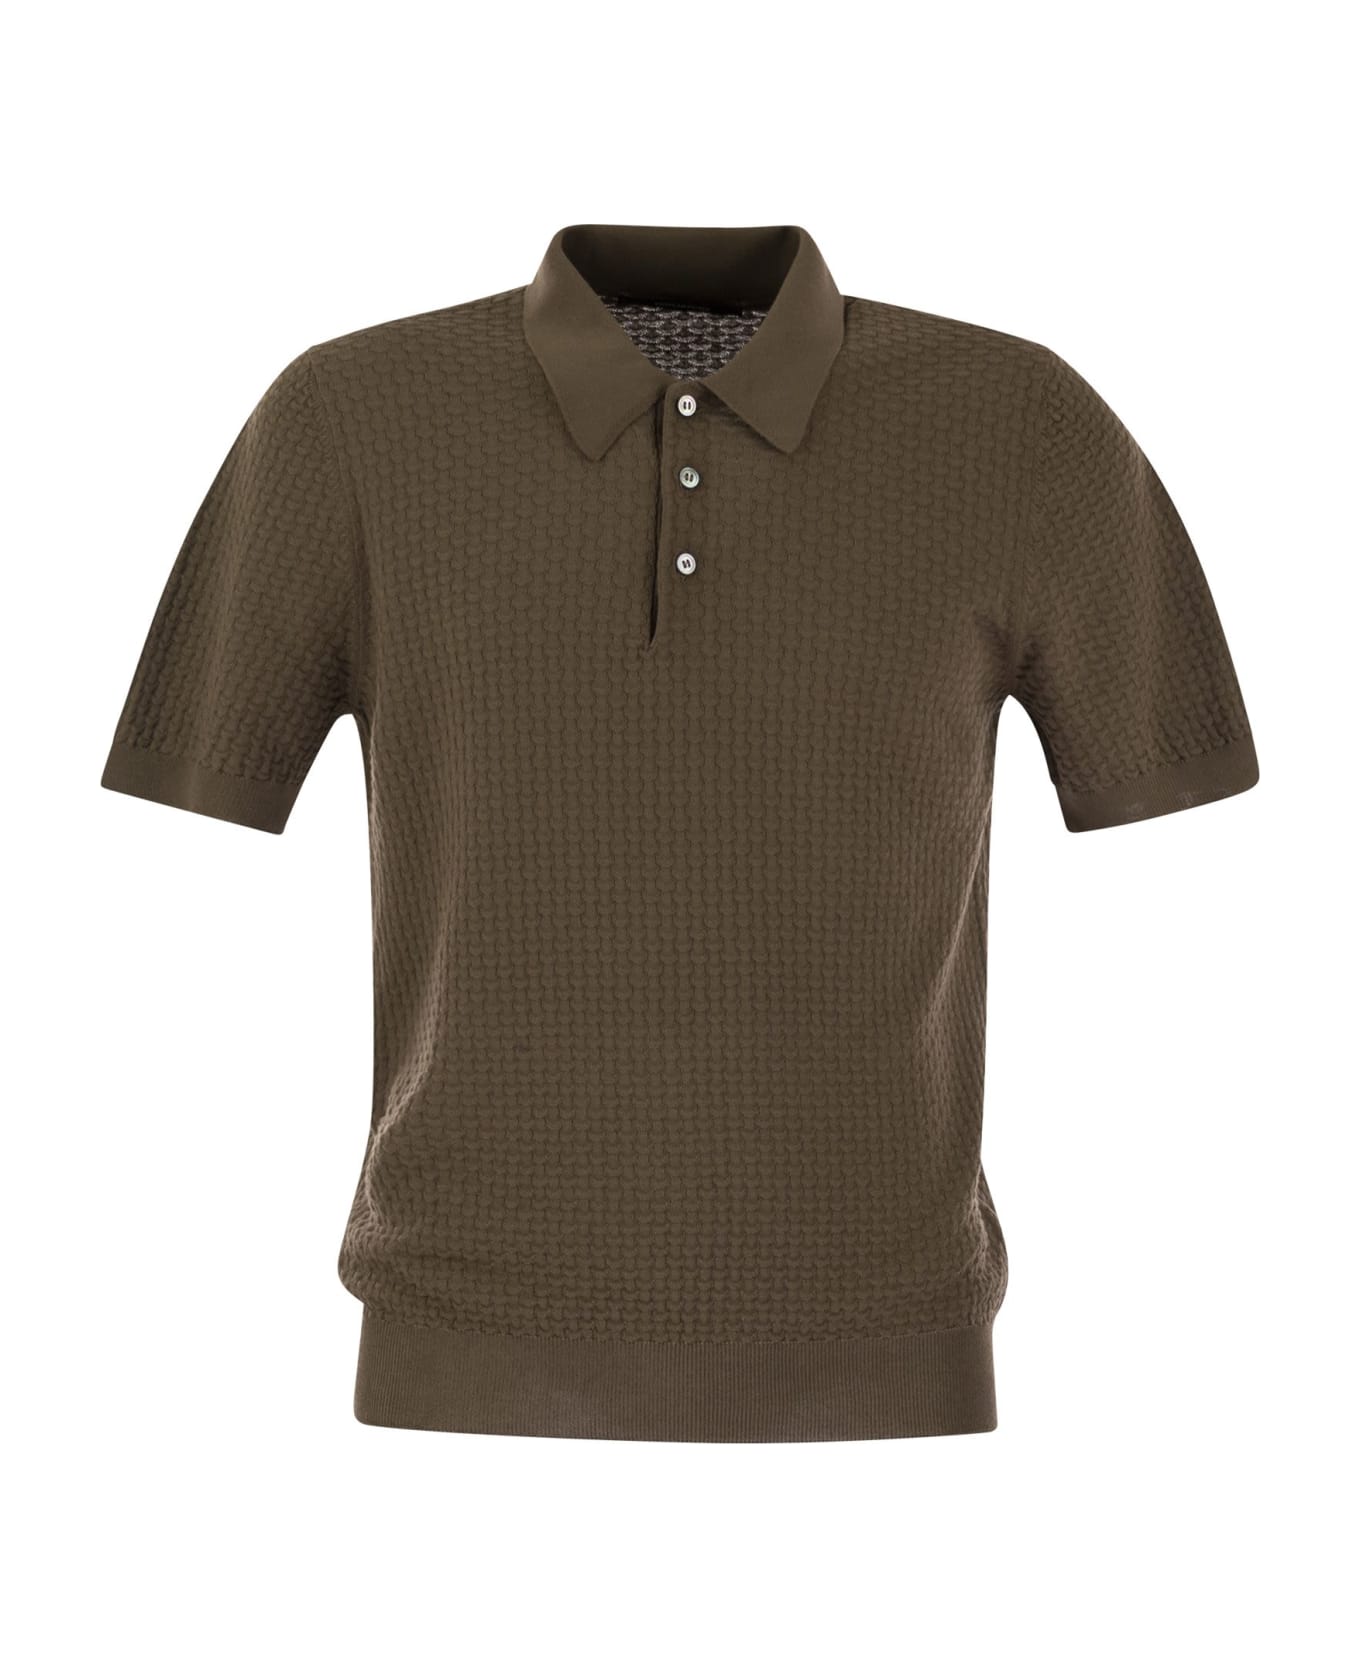 Tagliatore Knitted Cotton Polo Shirt - Brown